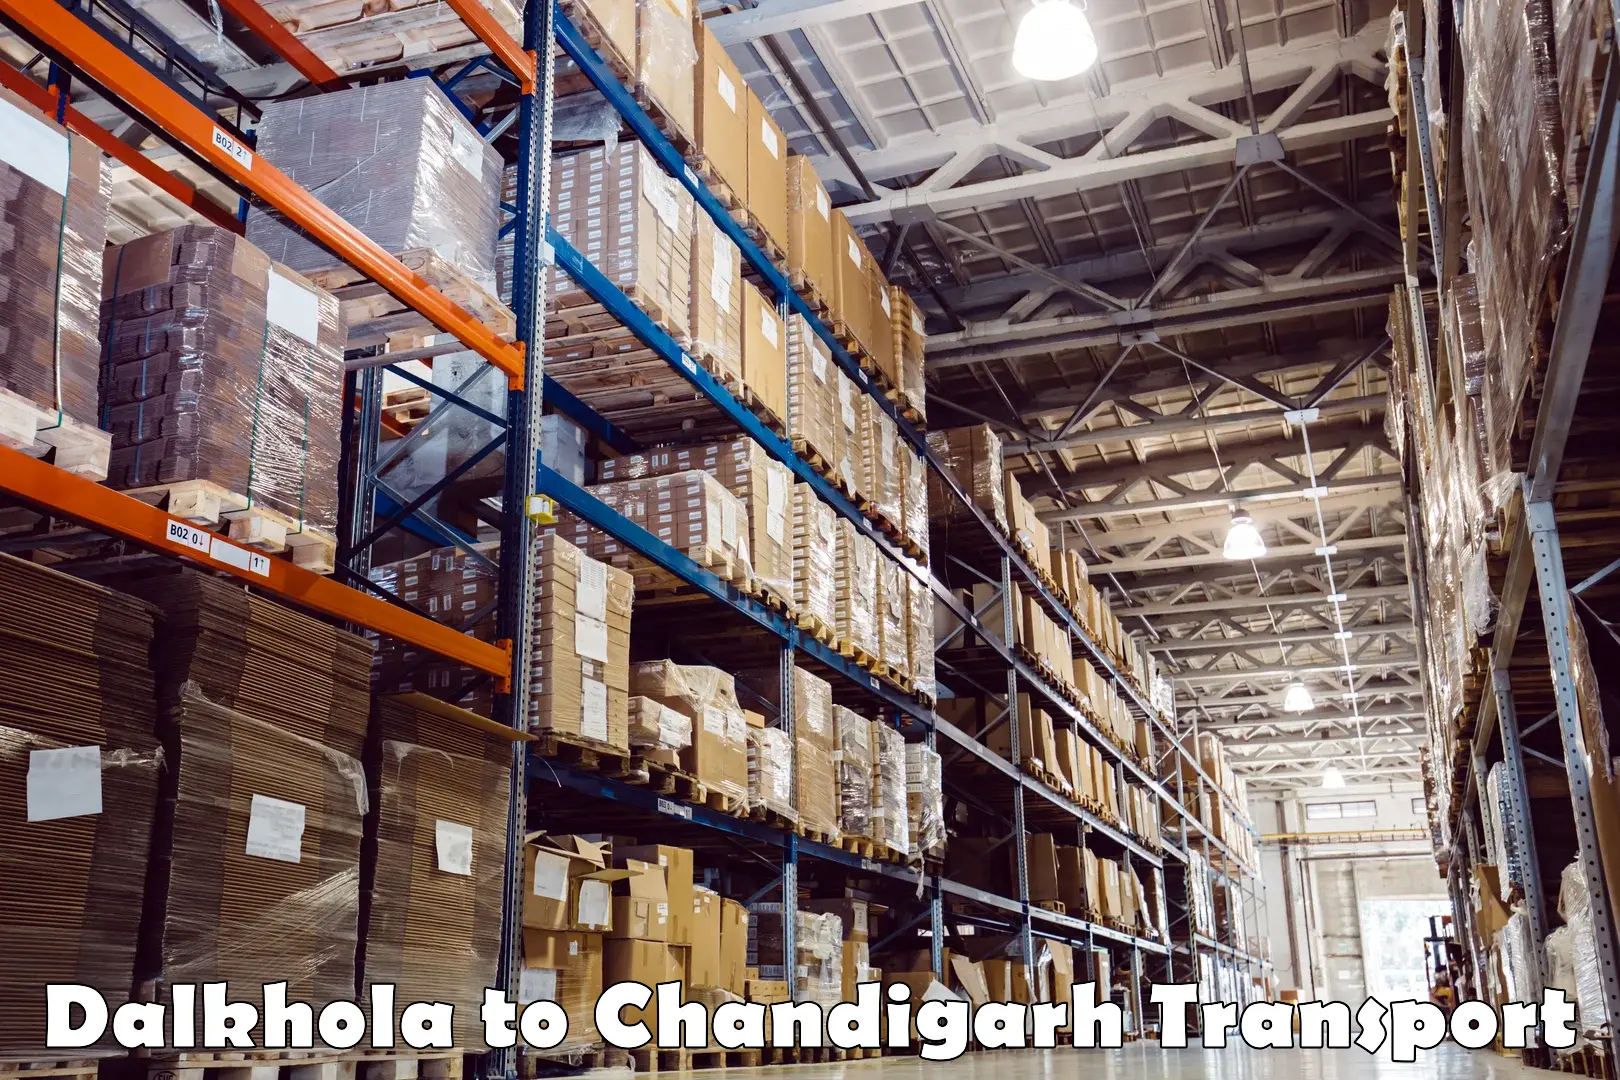 Truck transport companies in India Dalkhola to Chandigarh